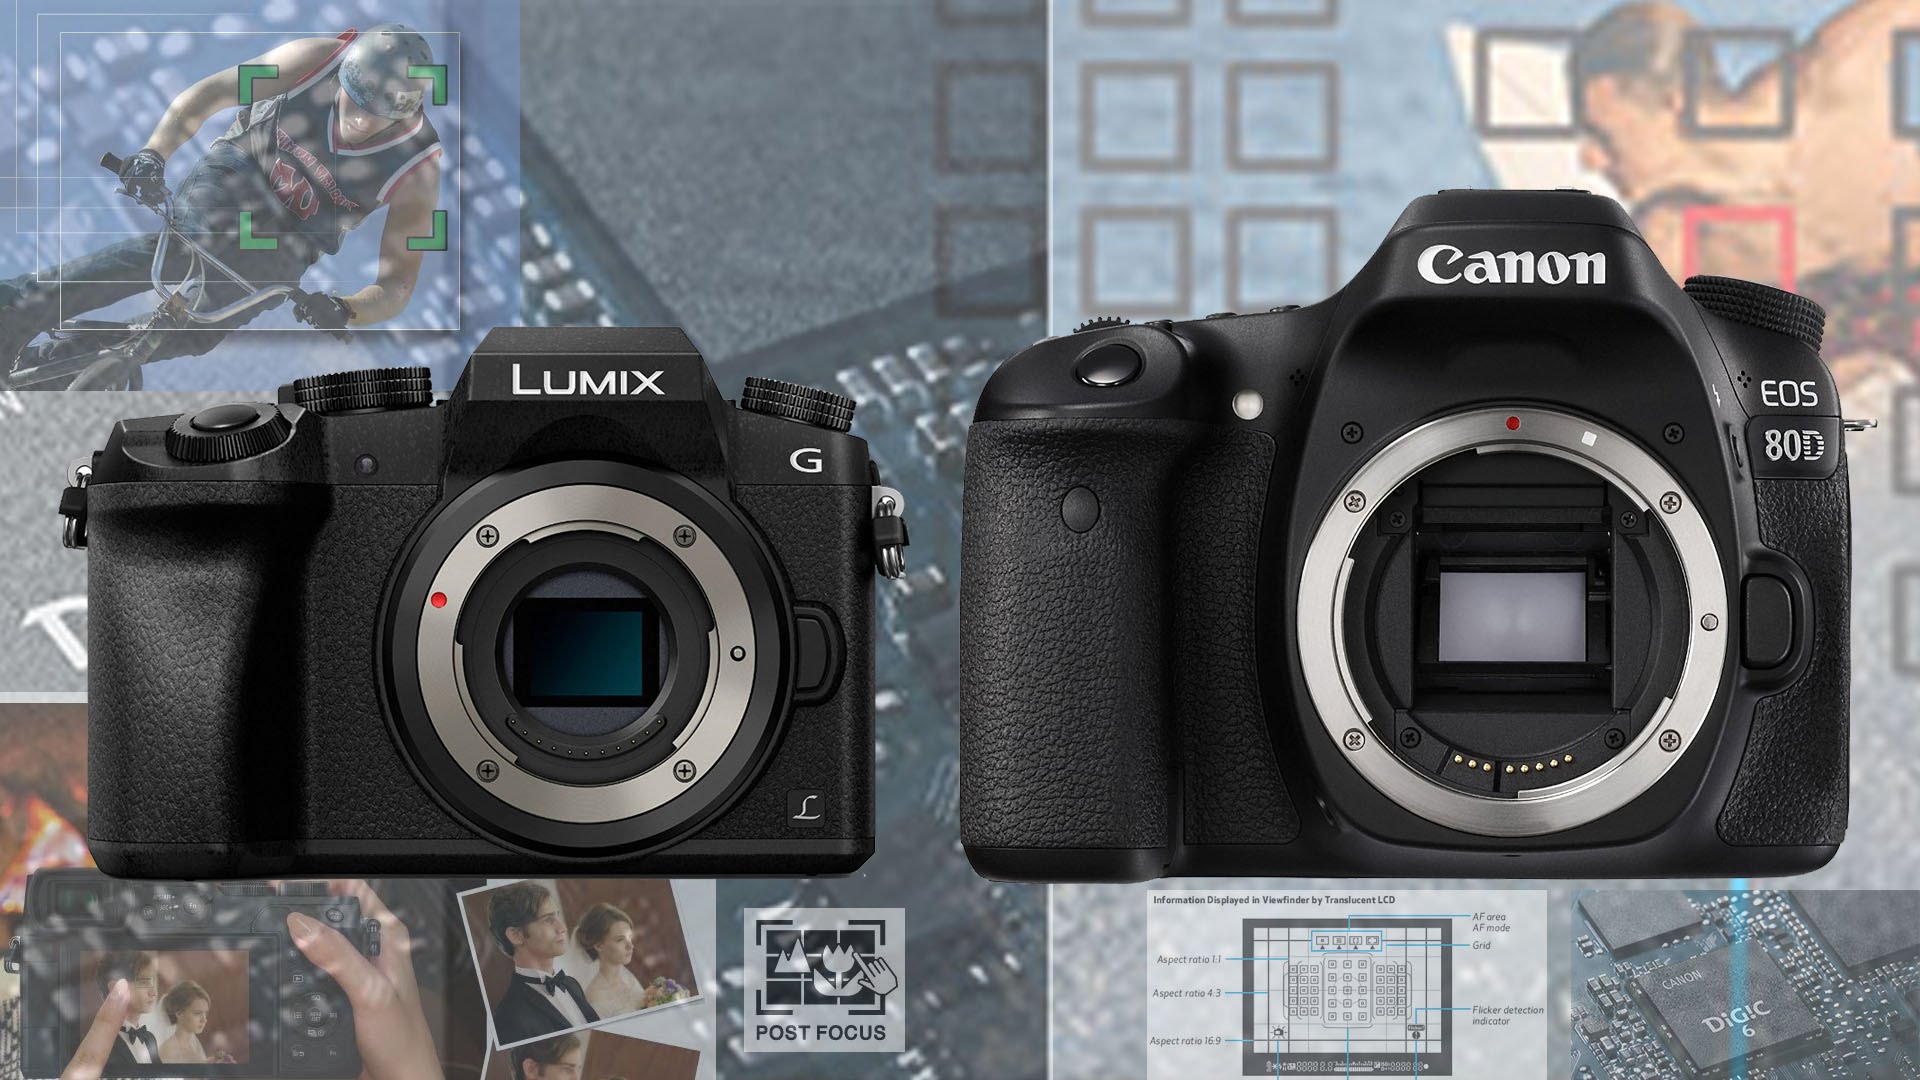 Canon 80D / 70D vs Panasonic G7 – Which One is Better for Video at Weddings?